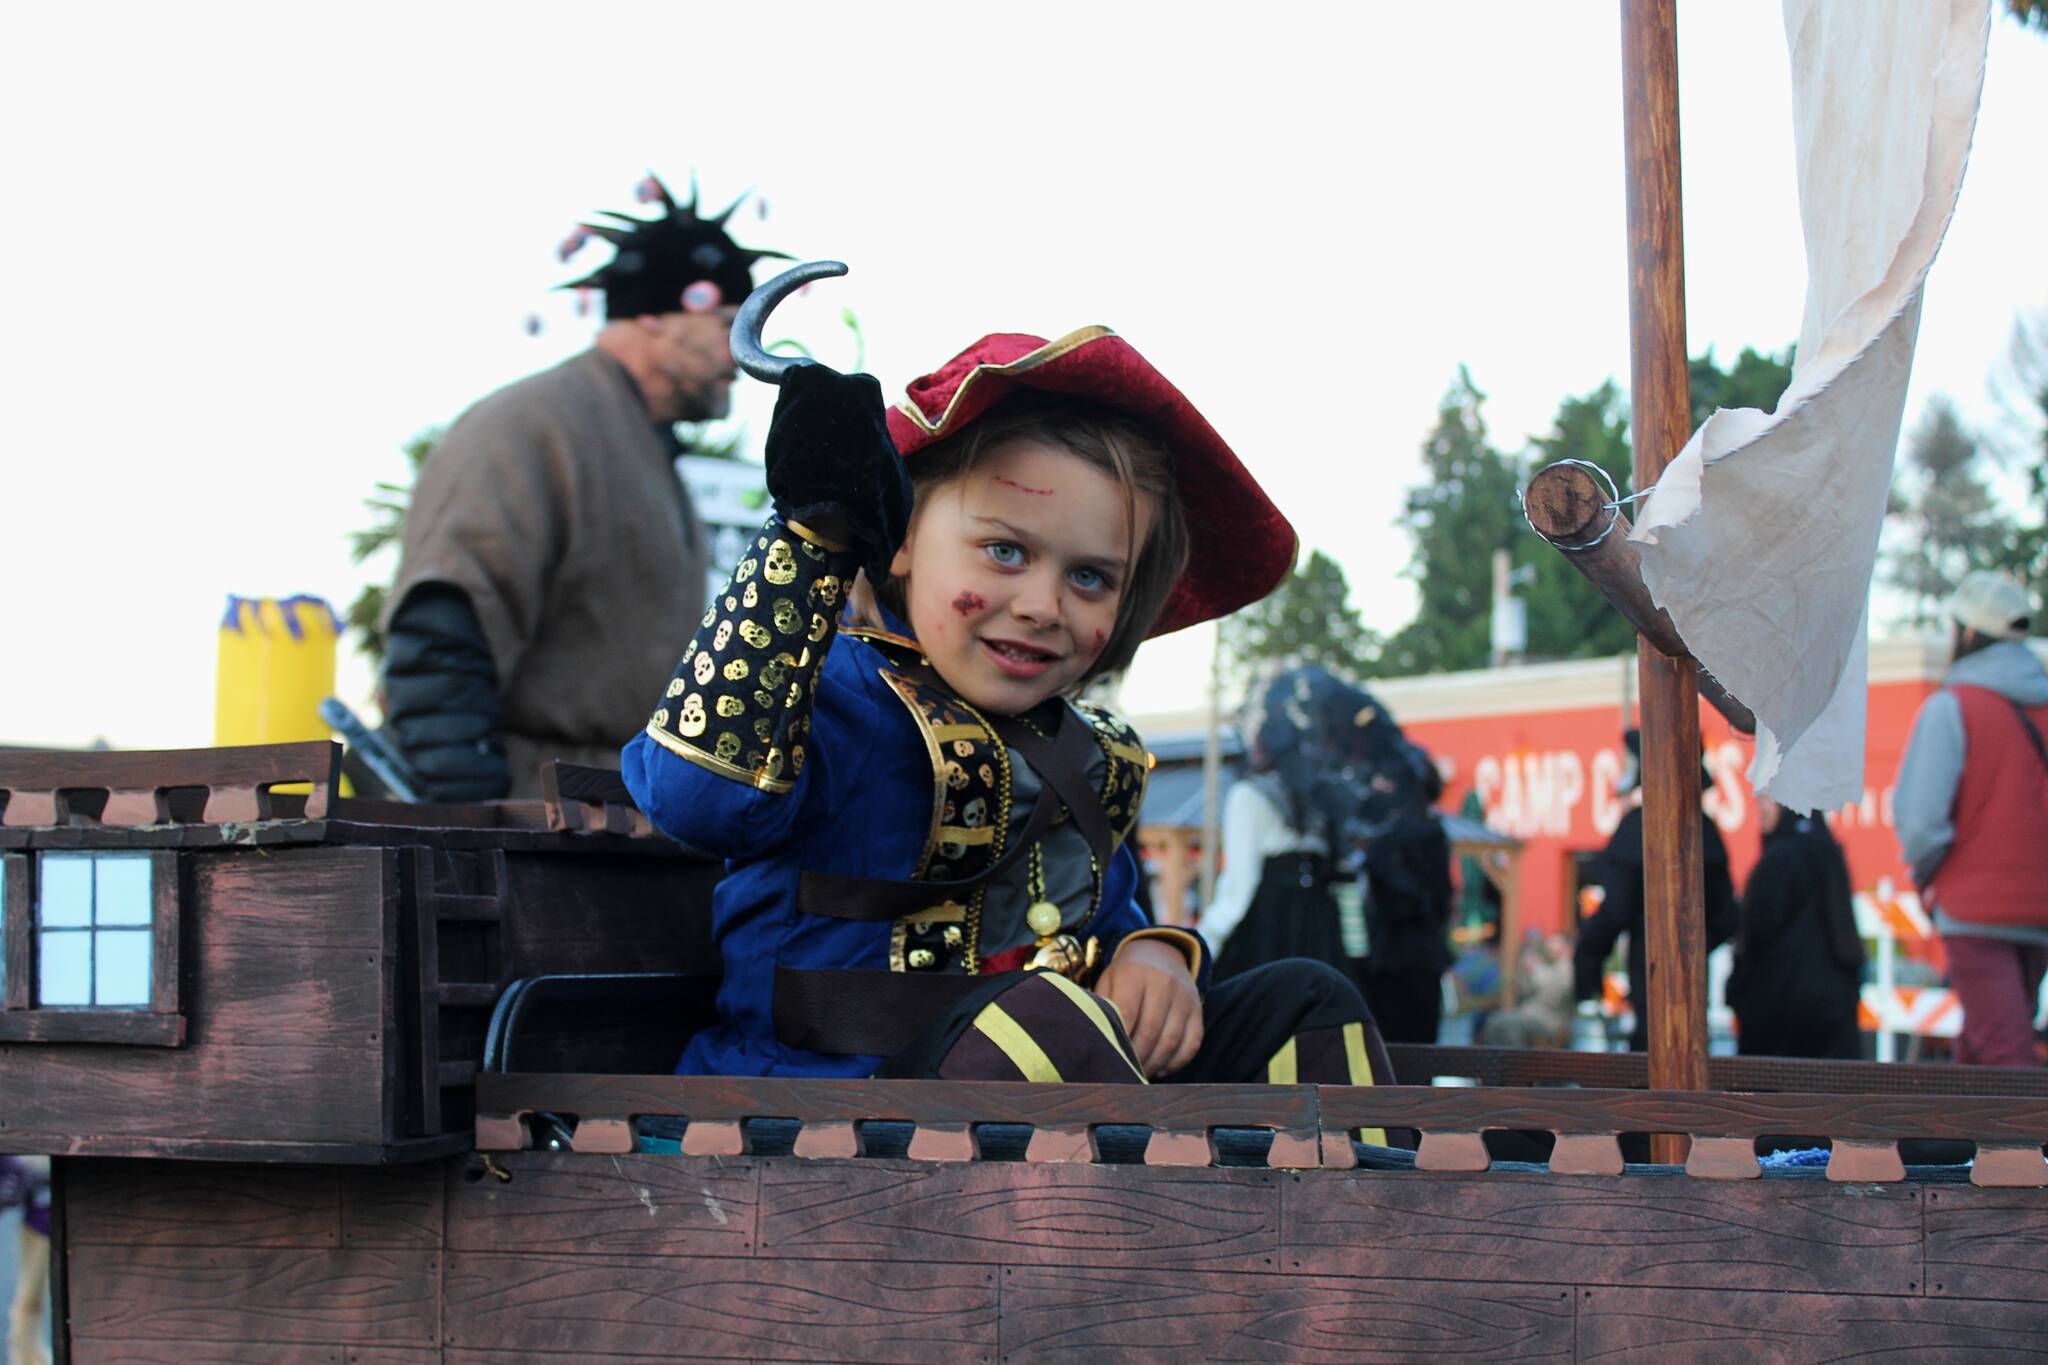 Alex Bruell photo
Russell McElvogue was decked out in pirate garb aboard a miniature pirate ship built by his dad, designer Matt McElvogue.